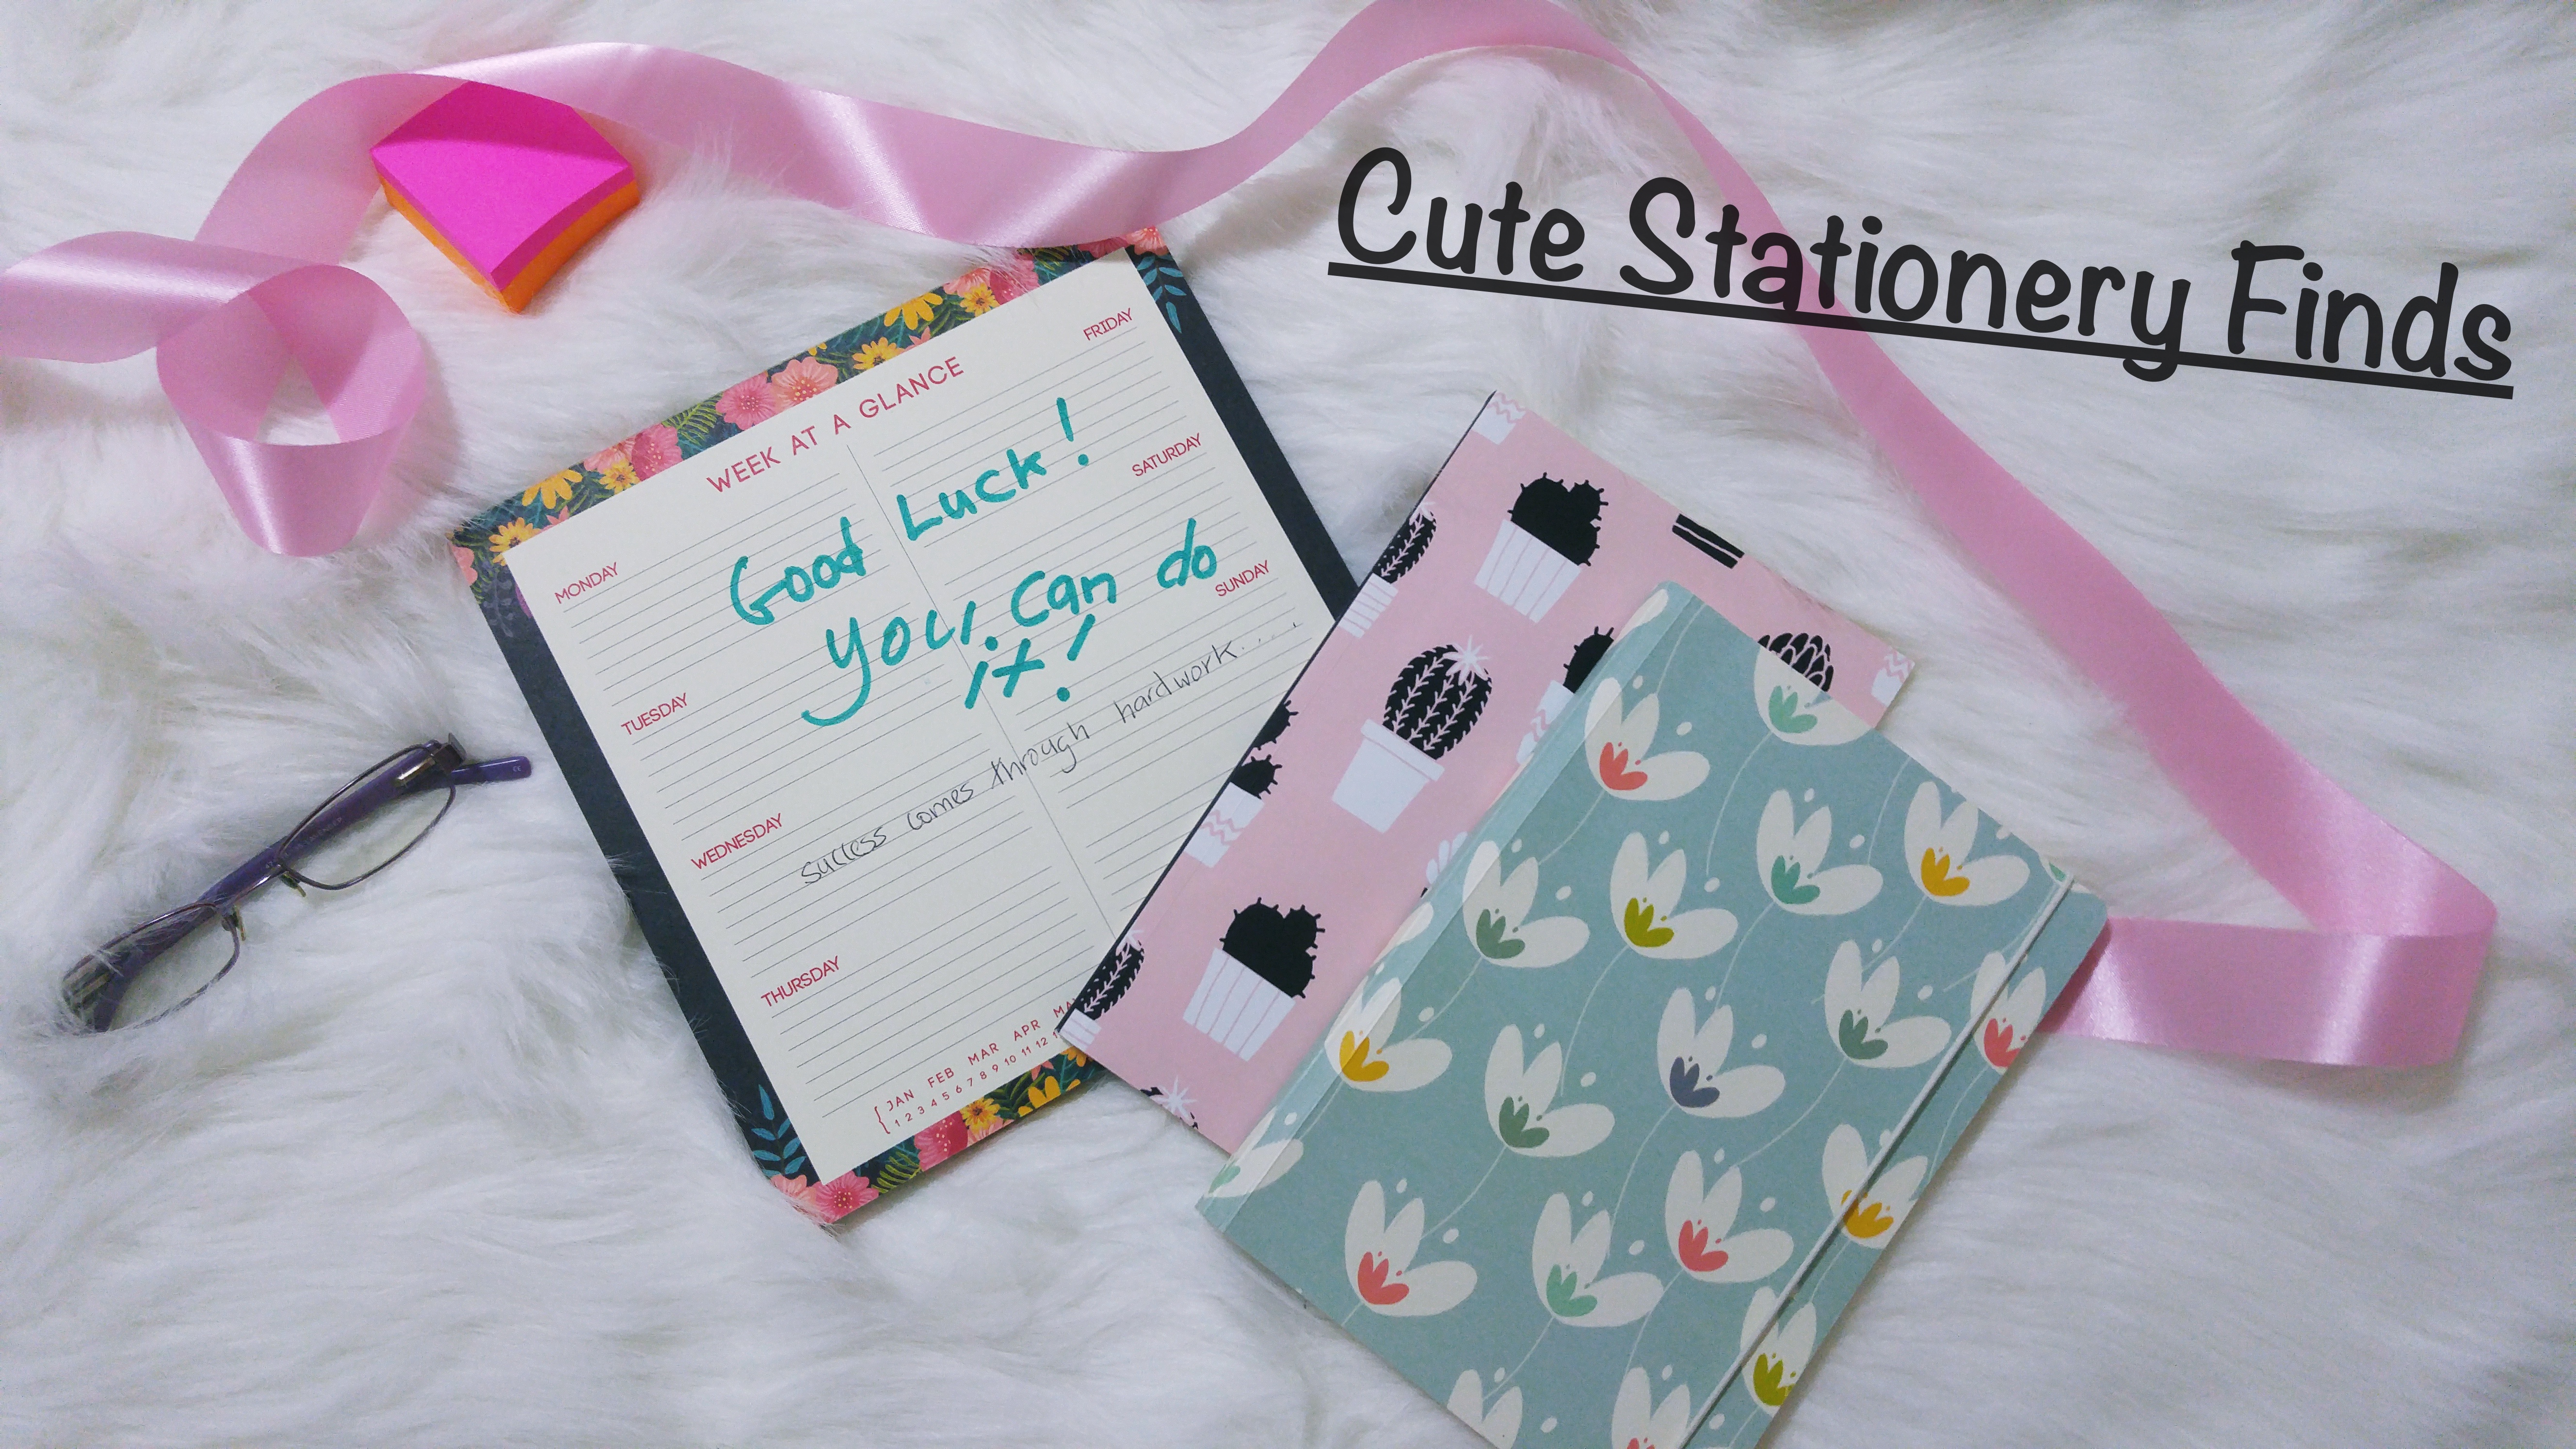 Cute Stationery that can be found online